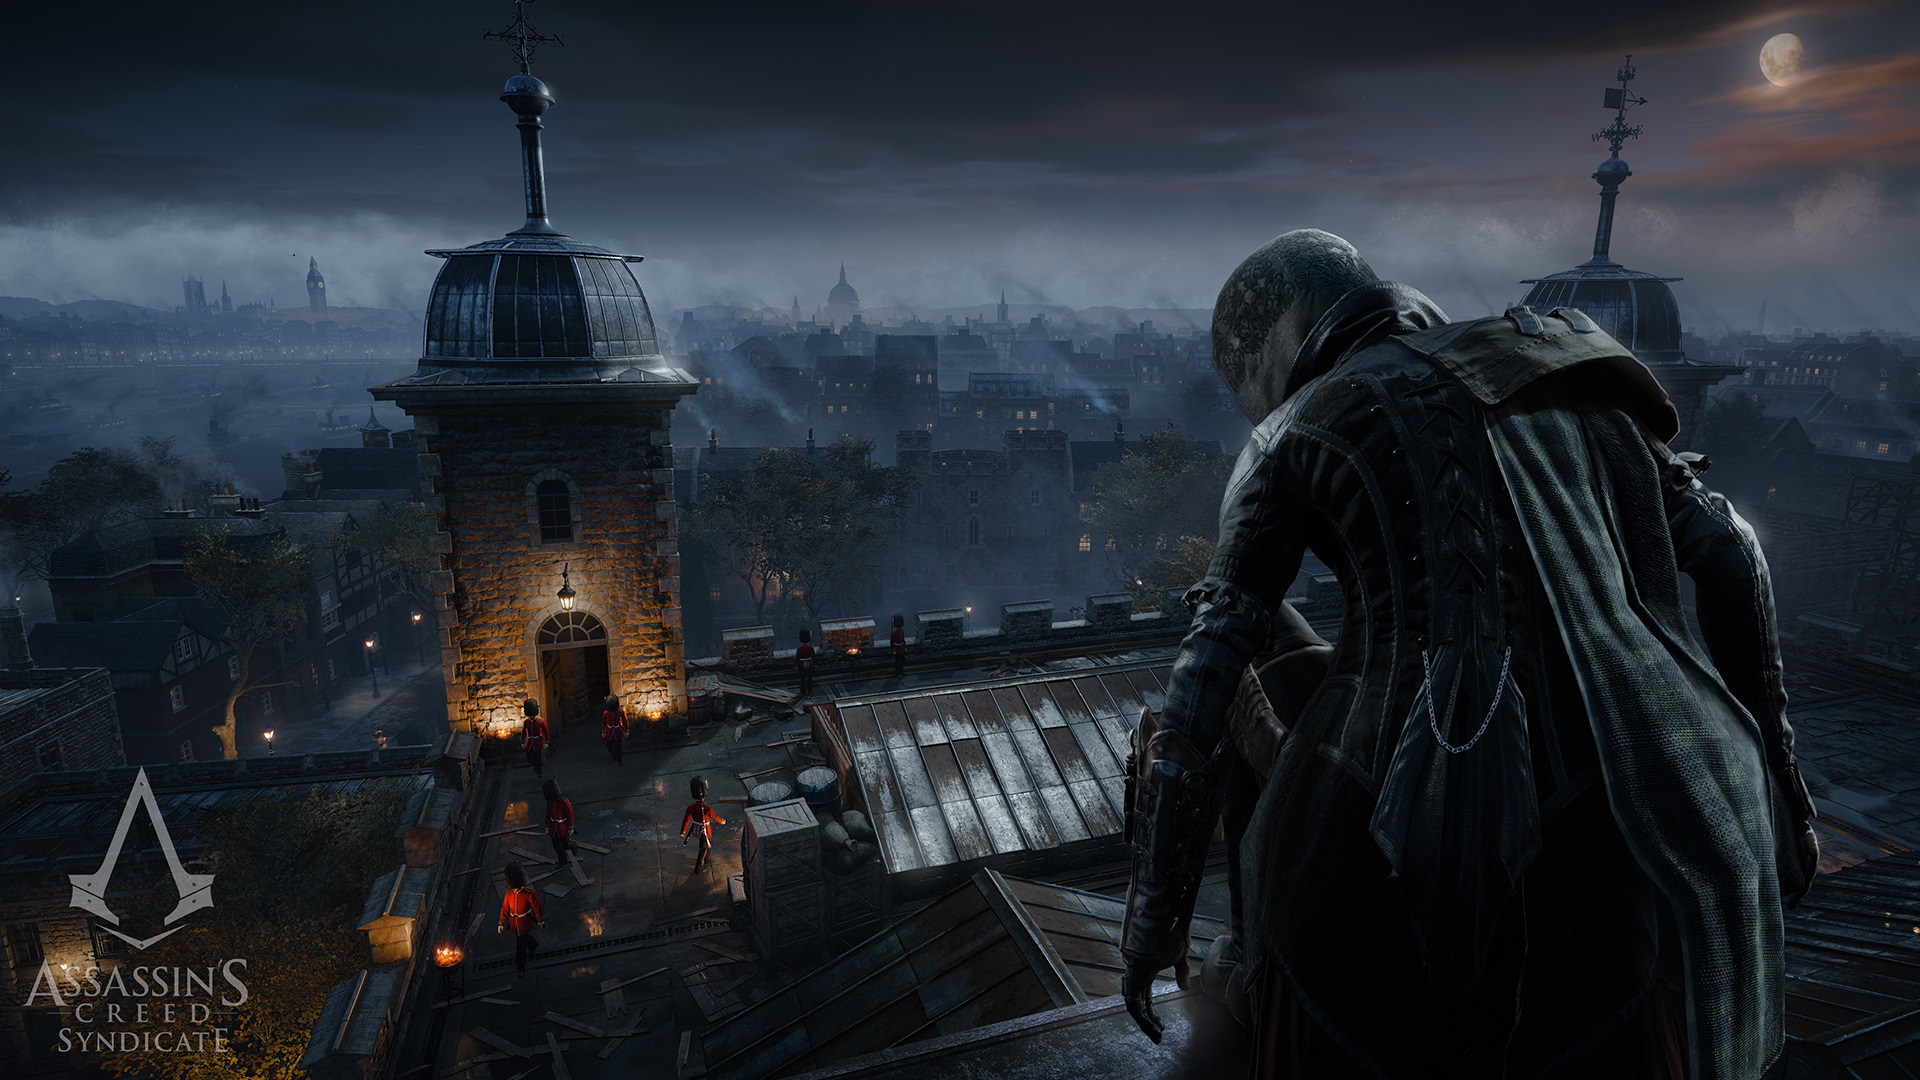 Assassin's Creed III Syndicate #2